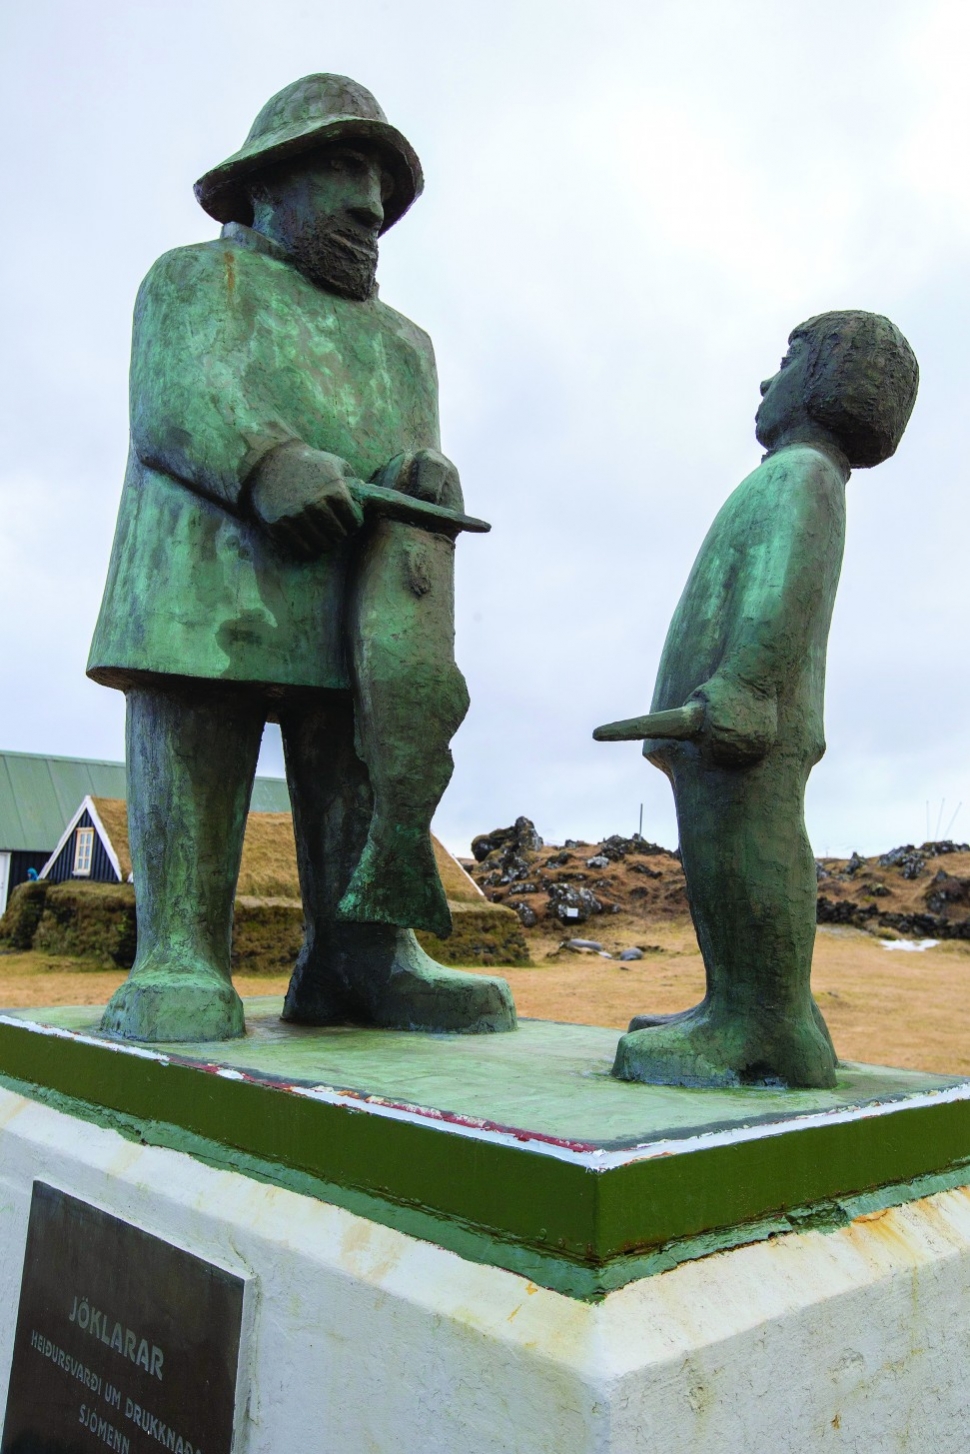 The Joklarar Statue-built in remembrance of fisherman who lost their lives at sea